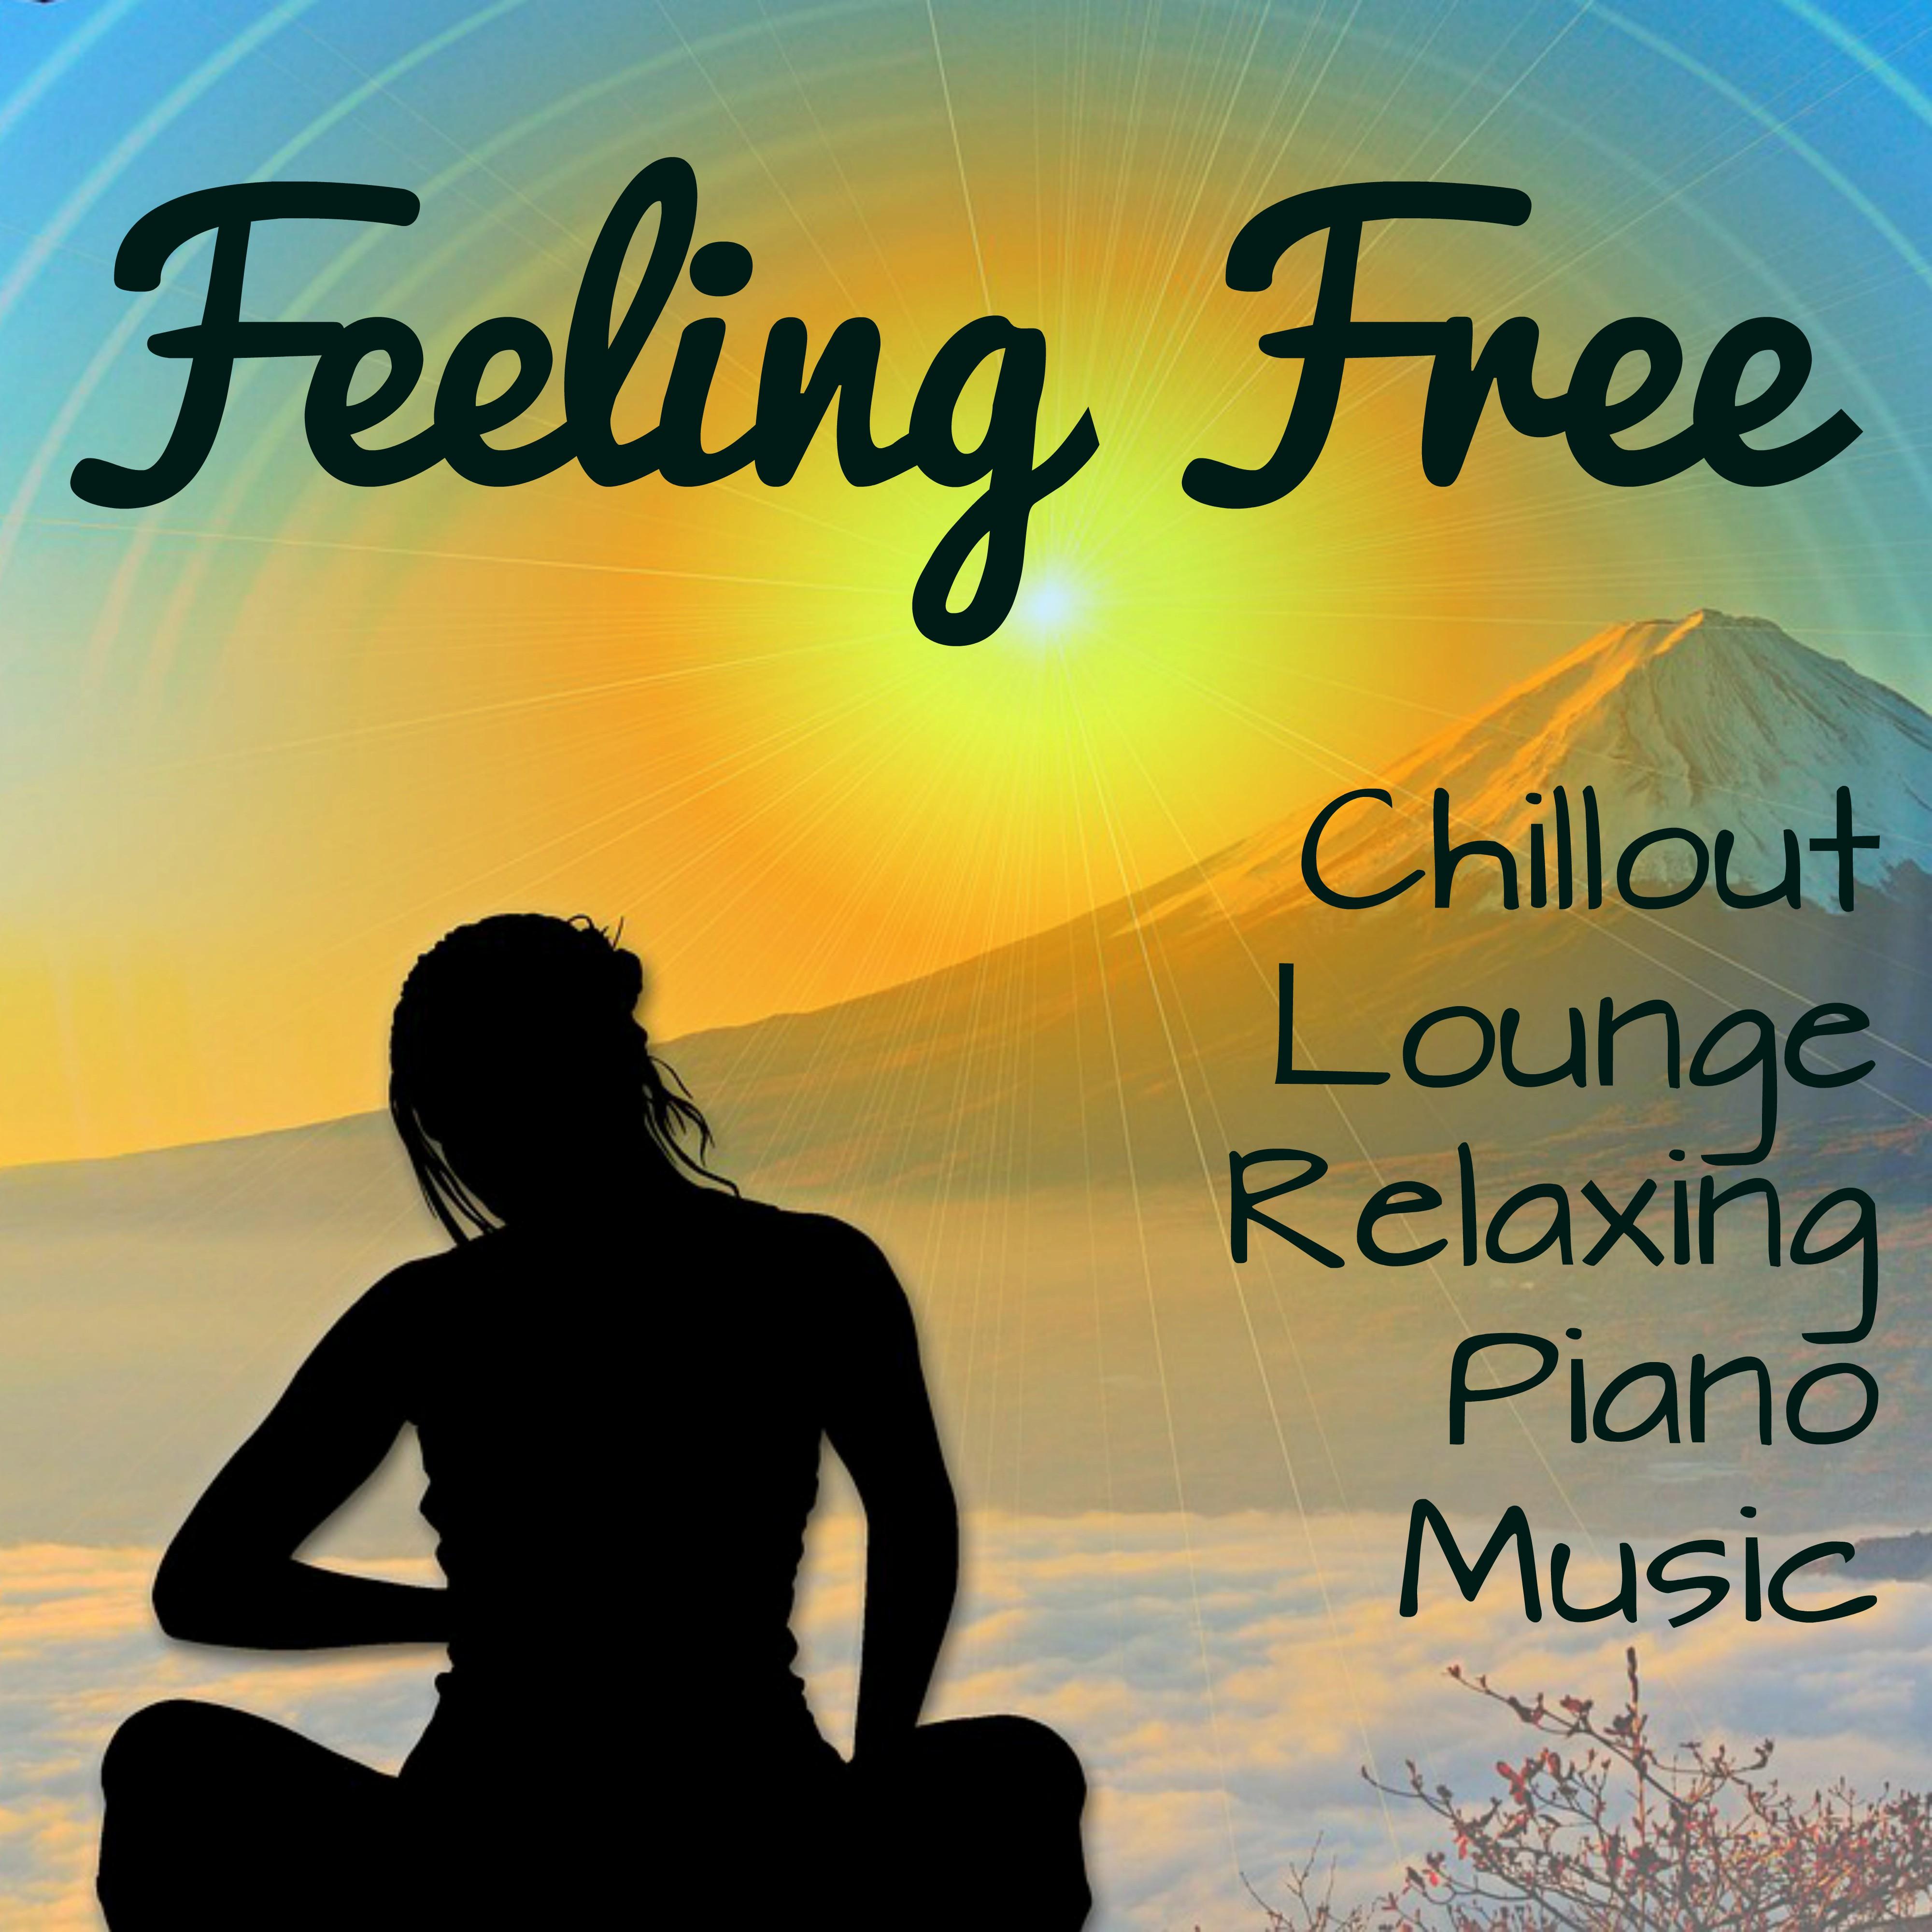 Feeling Free - Chillout Lounge Relaxing Piano Music for Pilates Exercises Minfulness Meditation Biofeedback Training